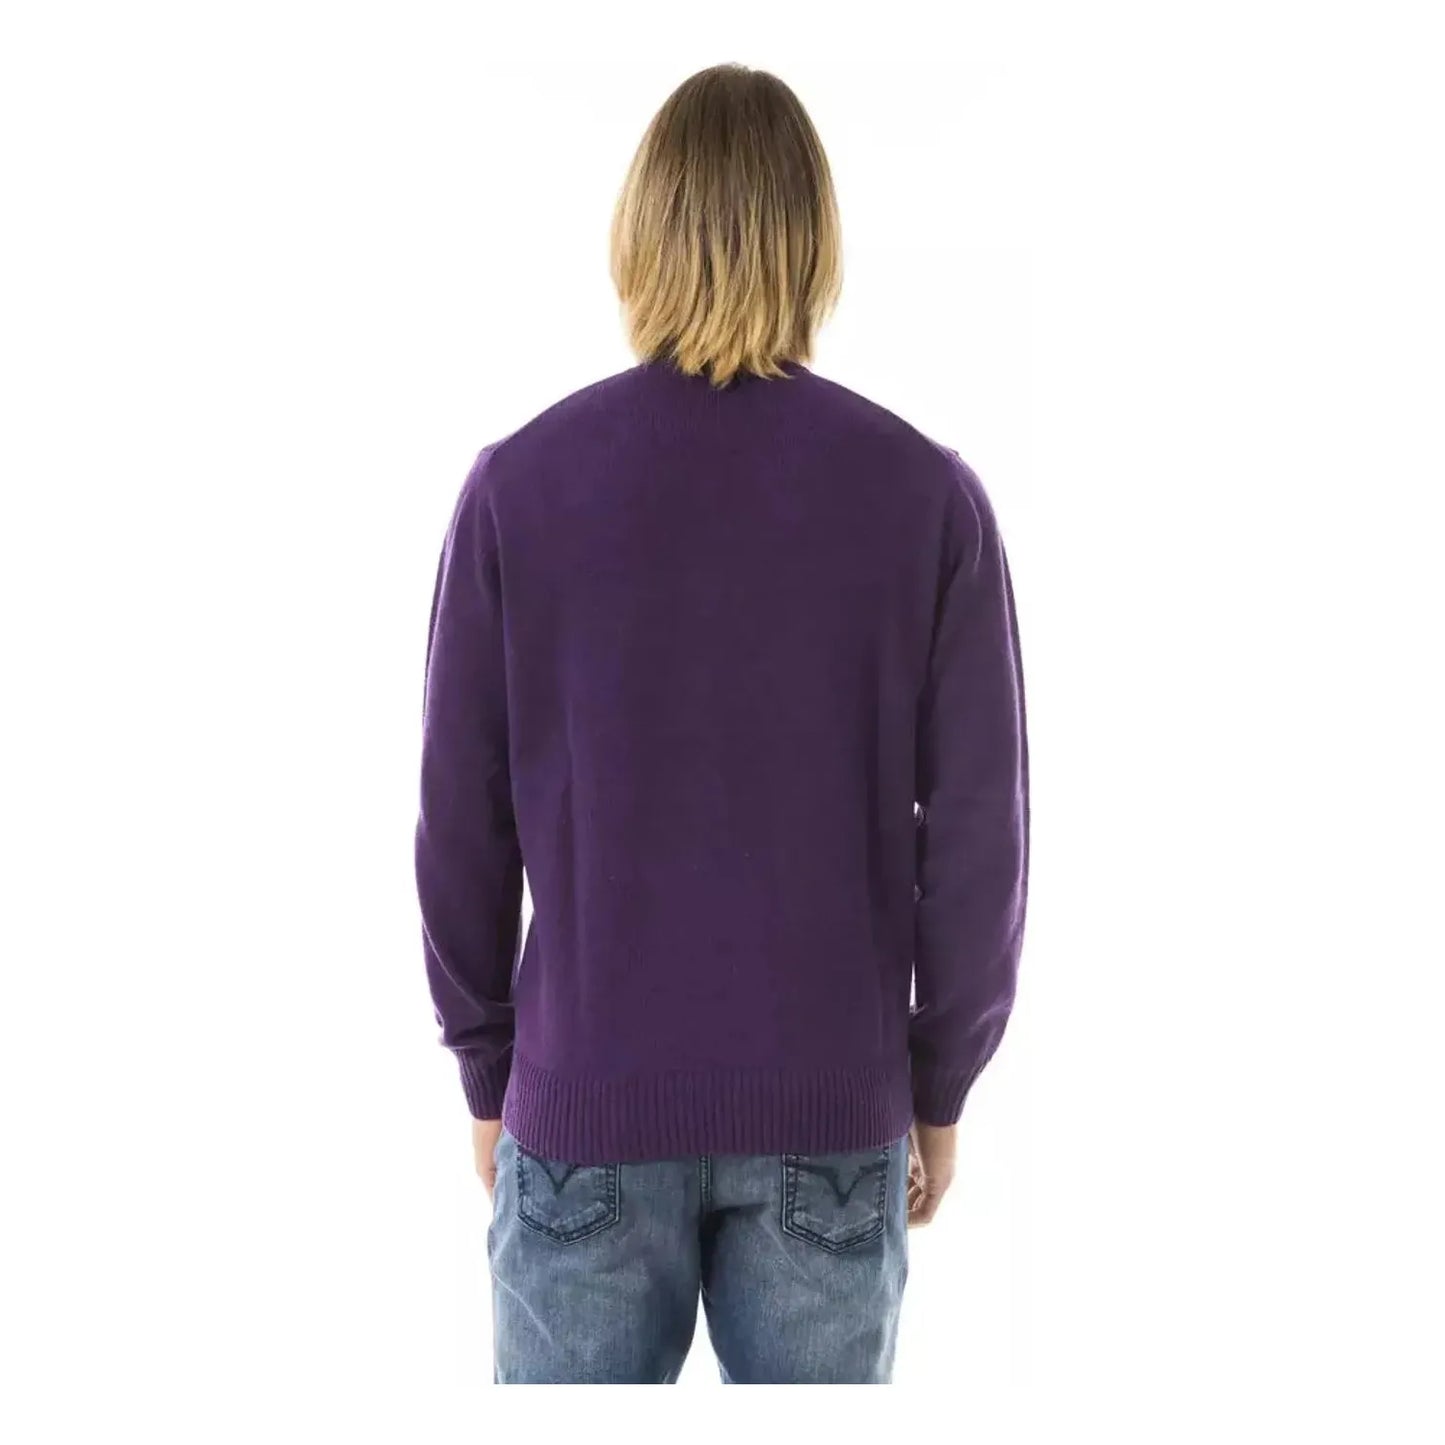 Uominitaliani Exquisite Embroidered Wool-Cashmere Sweater viola-sweater stock_product_image_17062_1172581055-19-c206db2b-7c2.webp